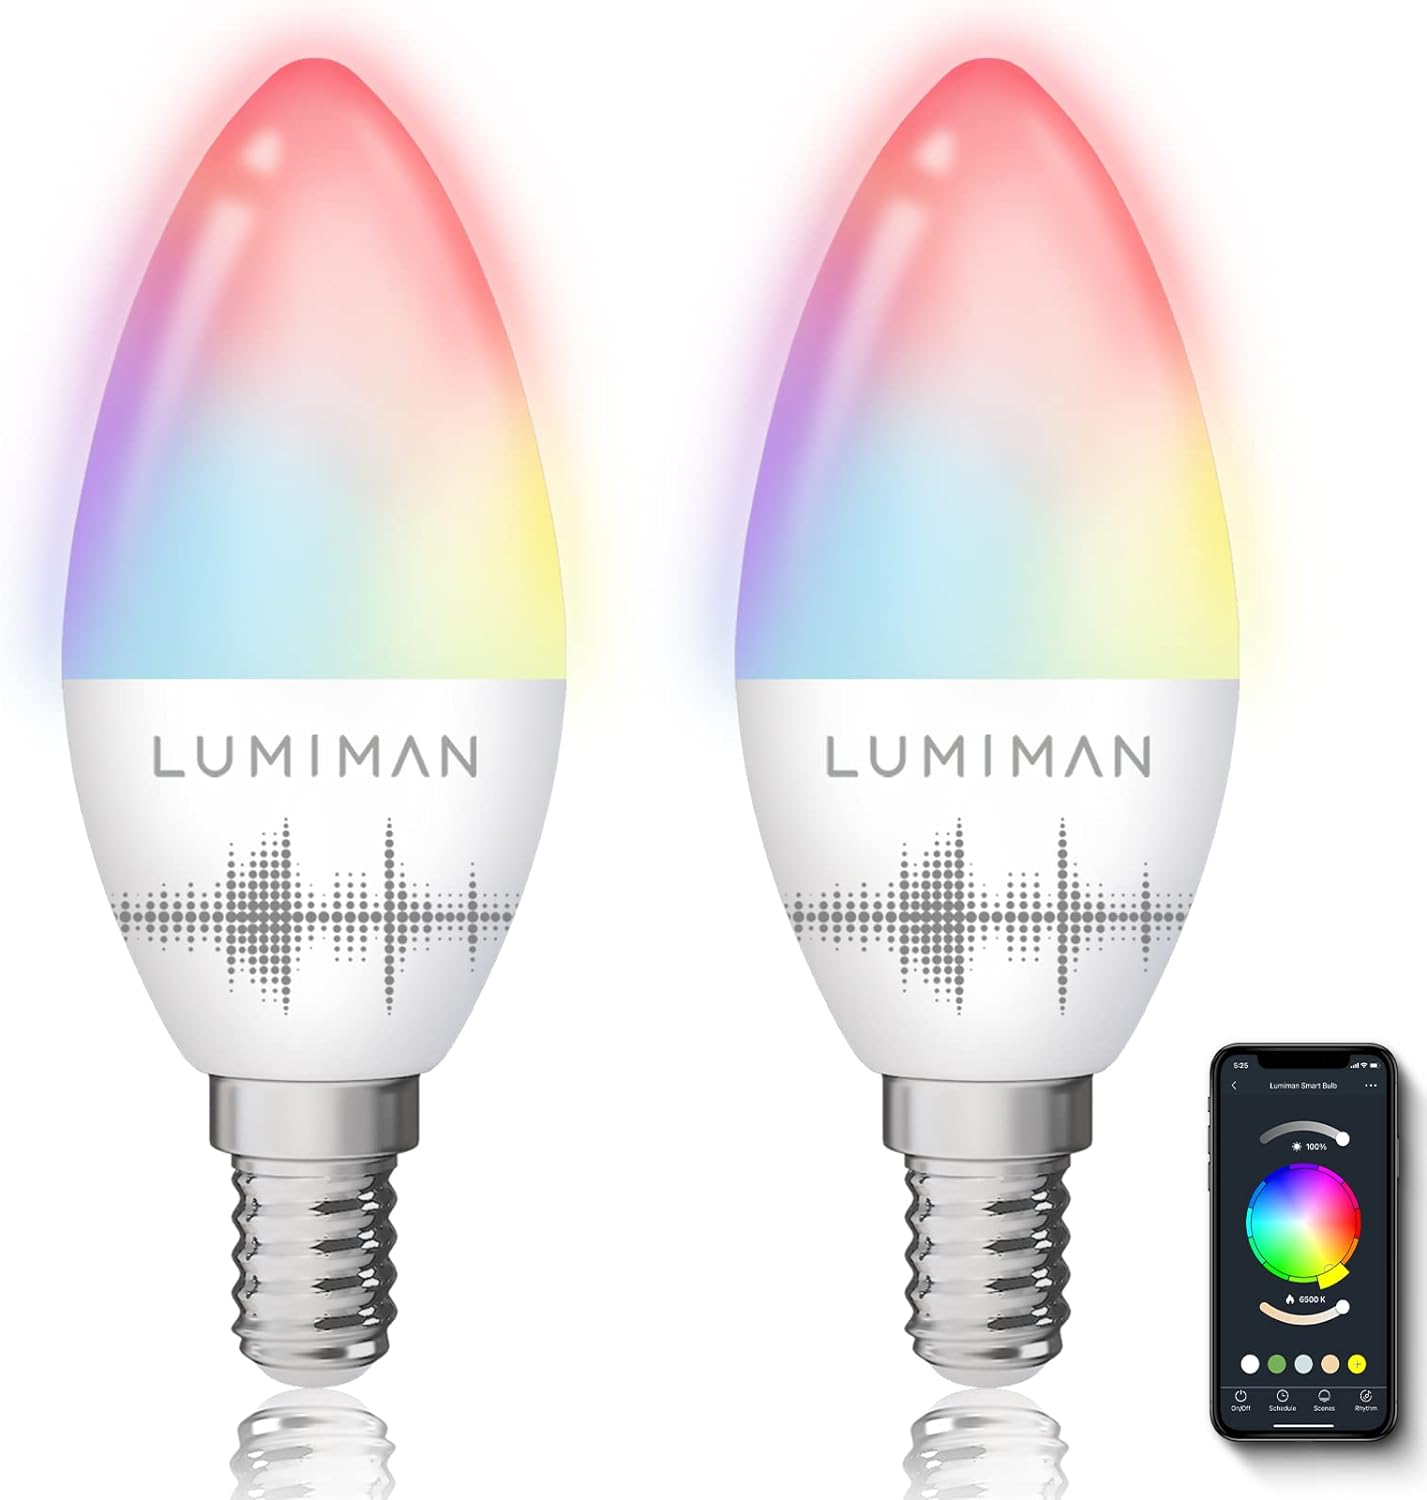 LUMIMAN Candelabra Smart Bulb E12 LED Smart Light Bulbs WiFi RGB Color Changing Smart Lights That Work with Alexa Google Home Music Sync Tunable White 5W 400lm No Hub Required 4 Pack